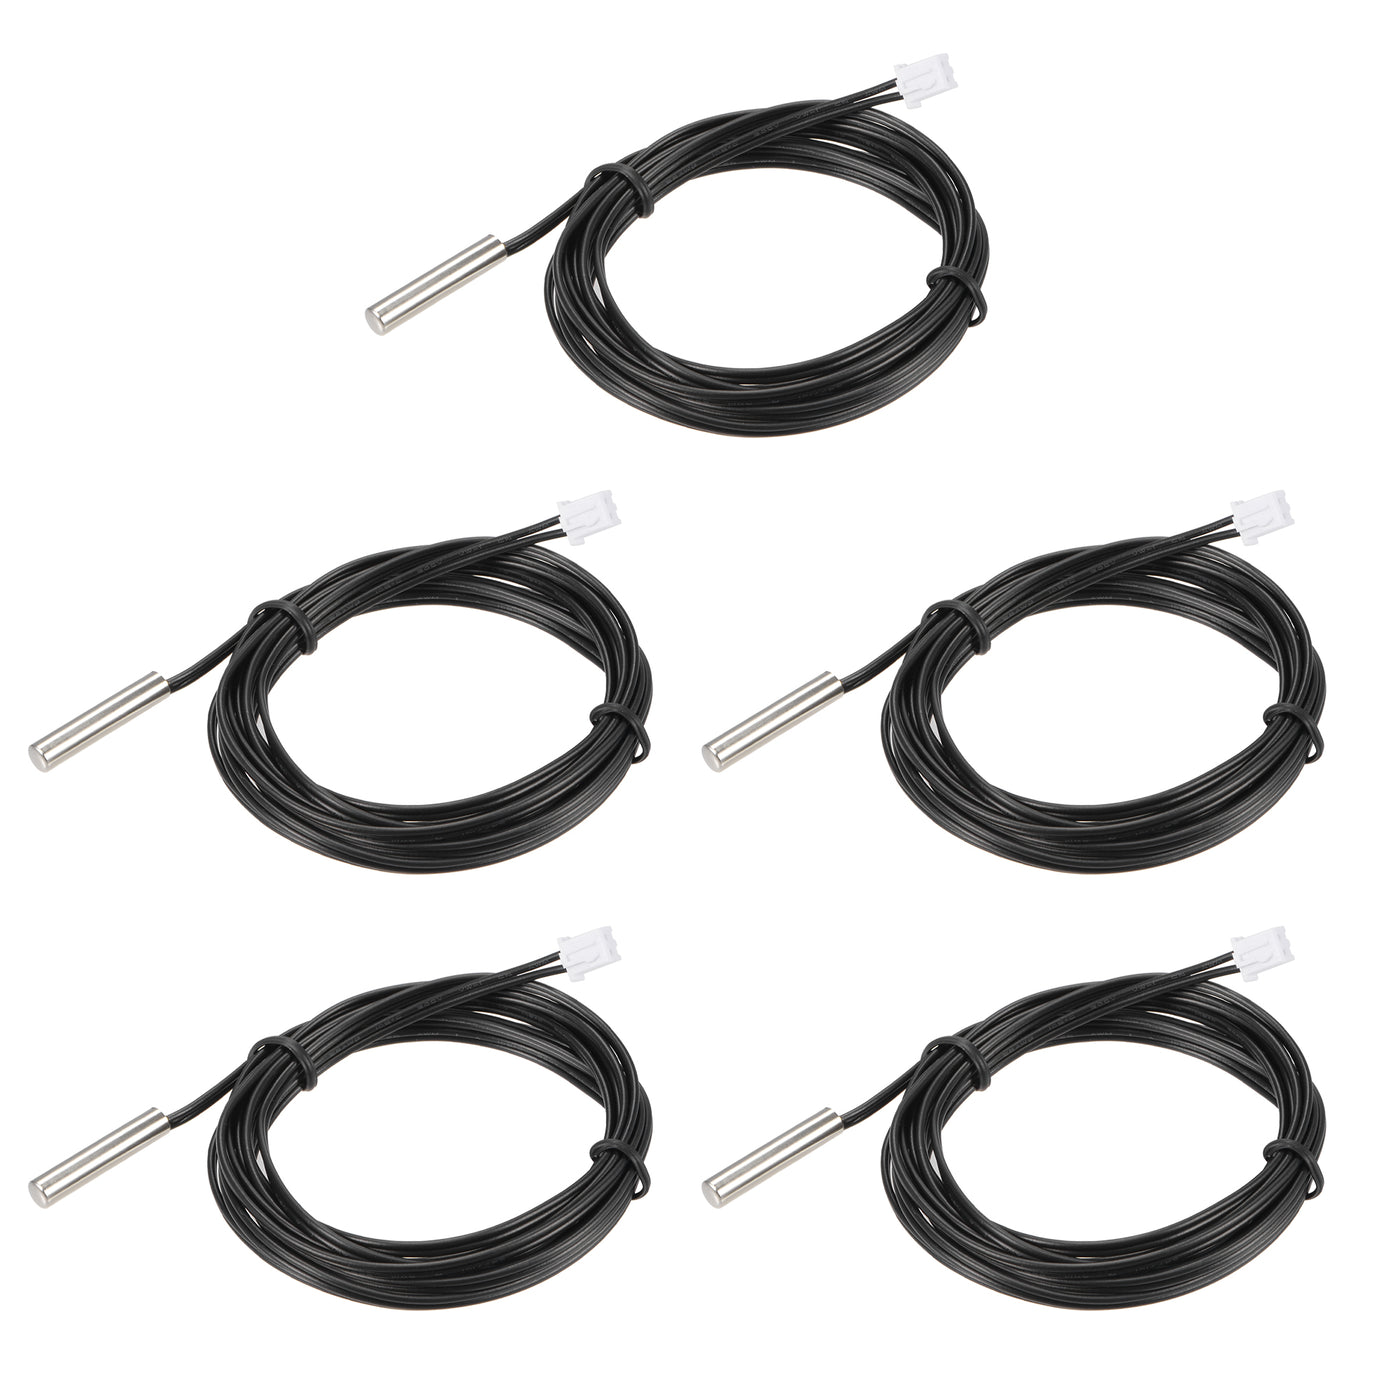 uxcell Uxcell 5pcs 50K Temperature Sensor Probe, Stainless Steel NTC Thermal Sensor Probe 6.6ft Digital Thermometer Extension Cable